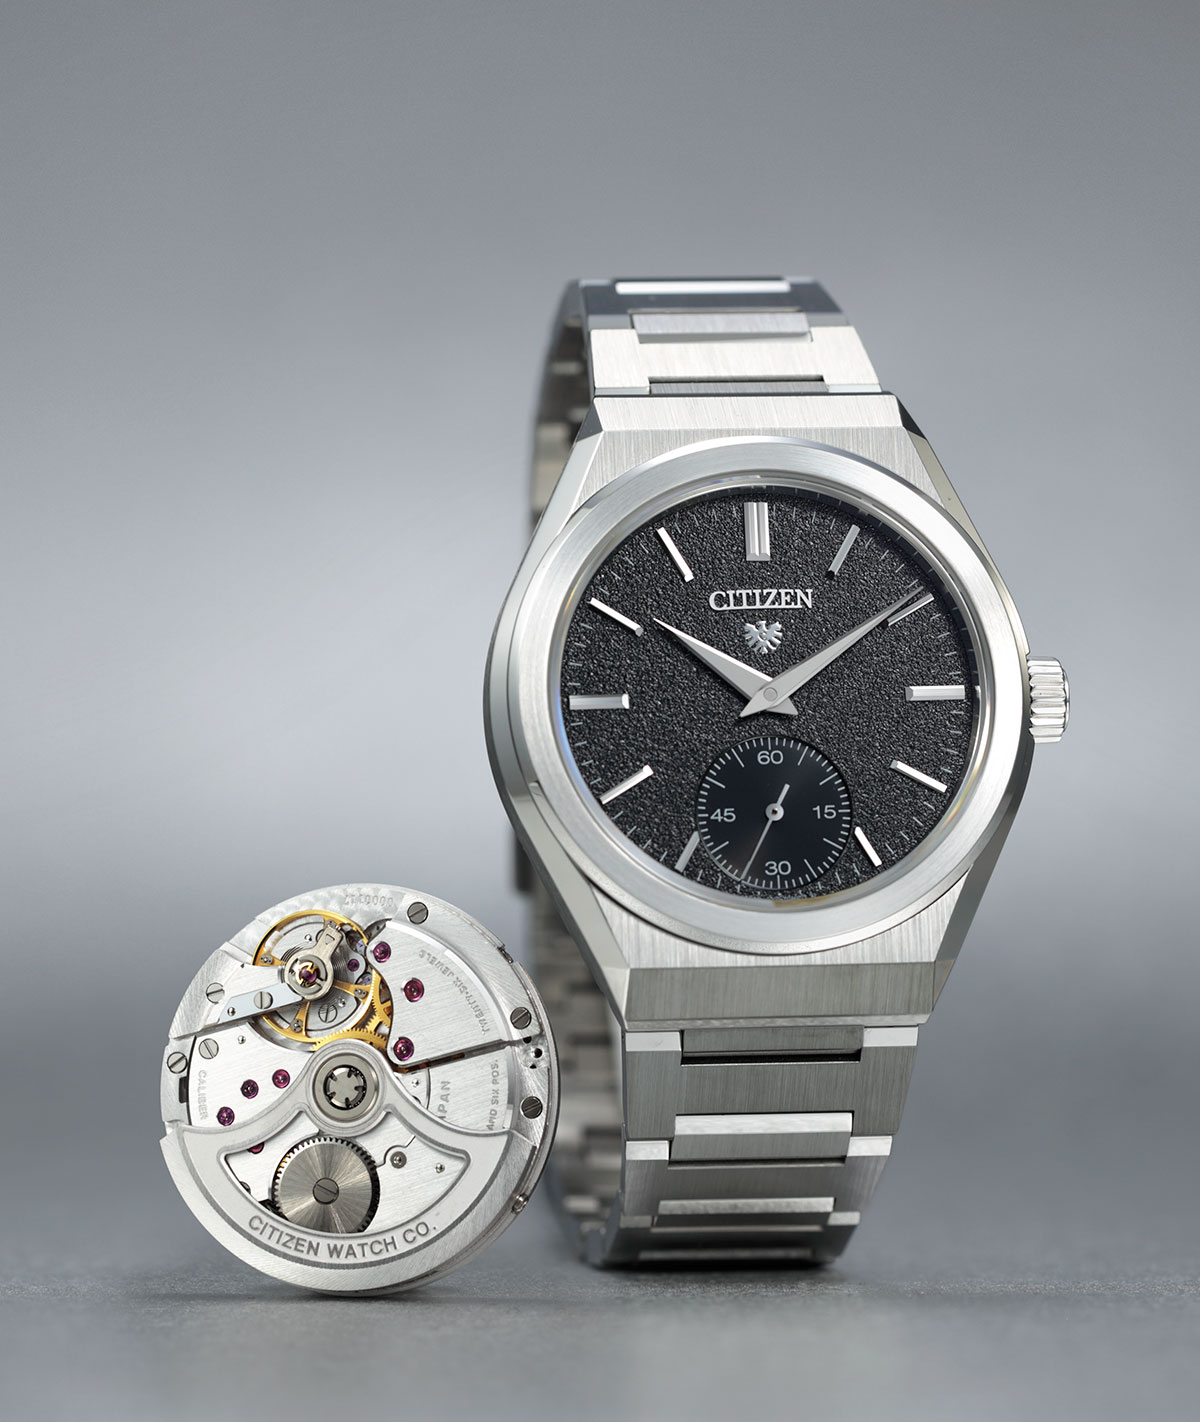 History and interesting facts about the Citizen Eco Drive